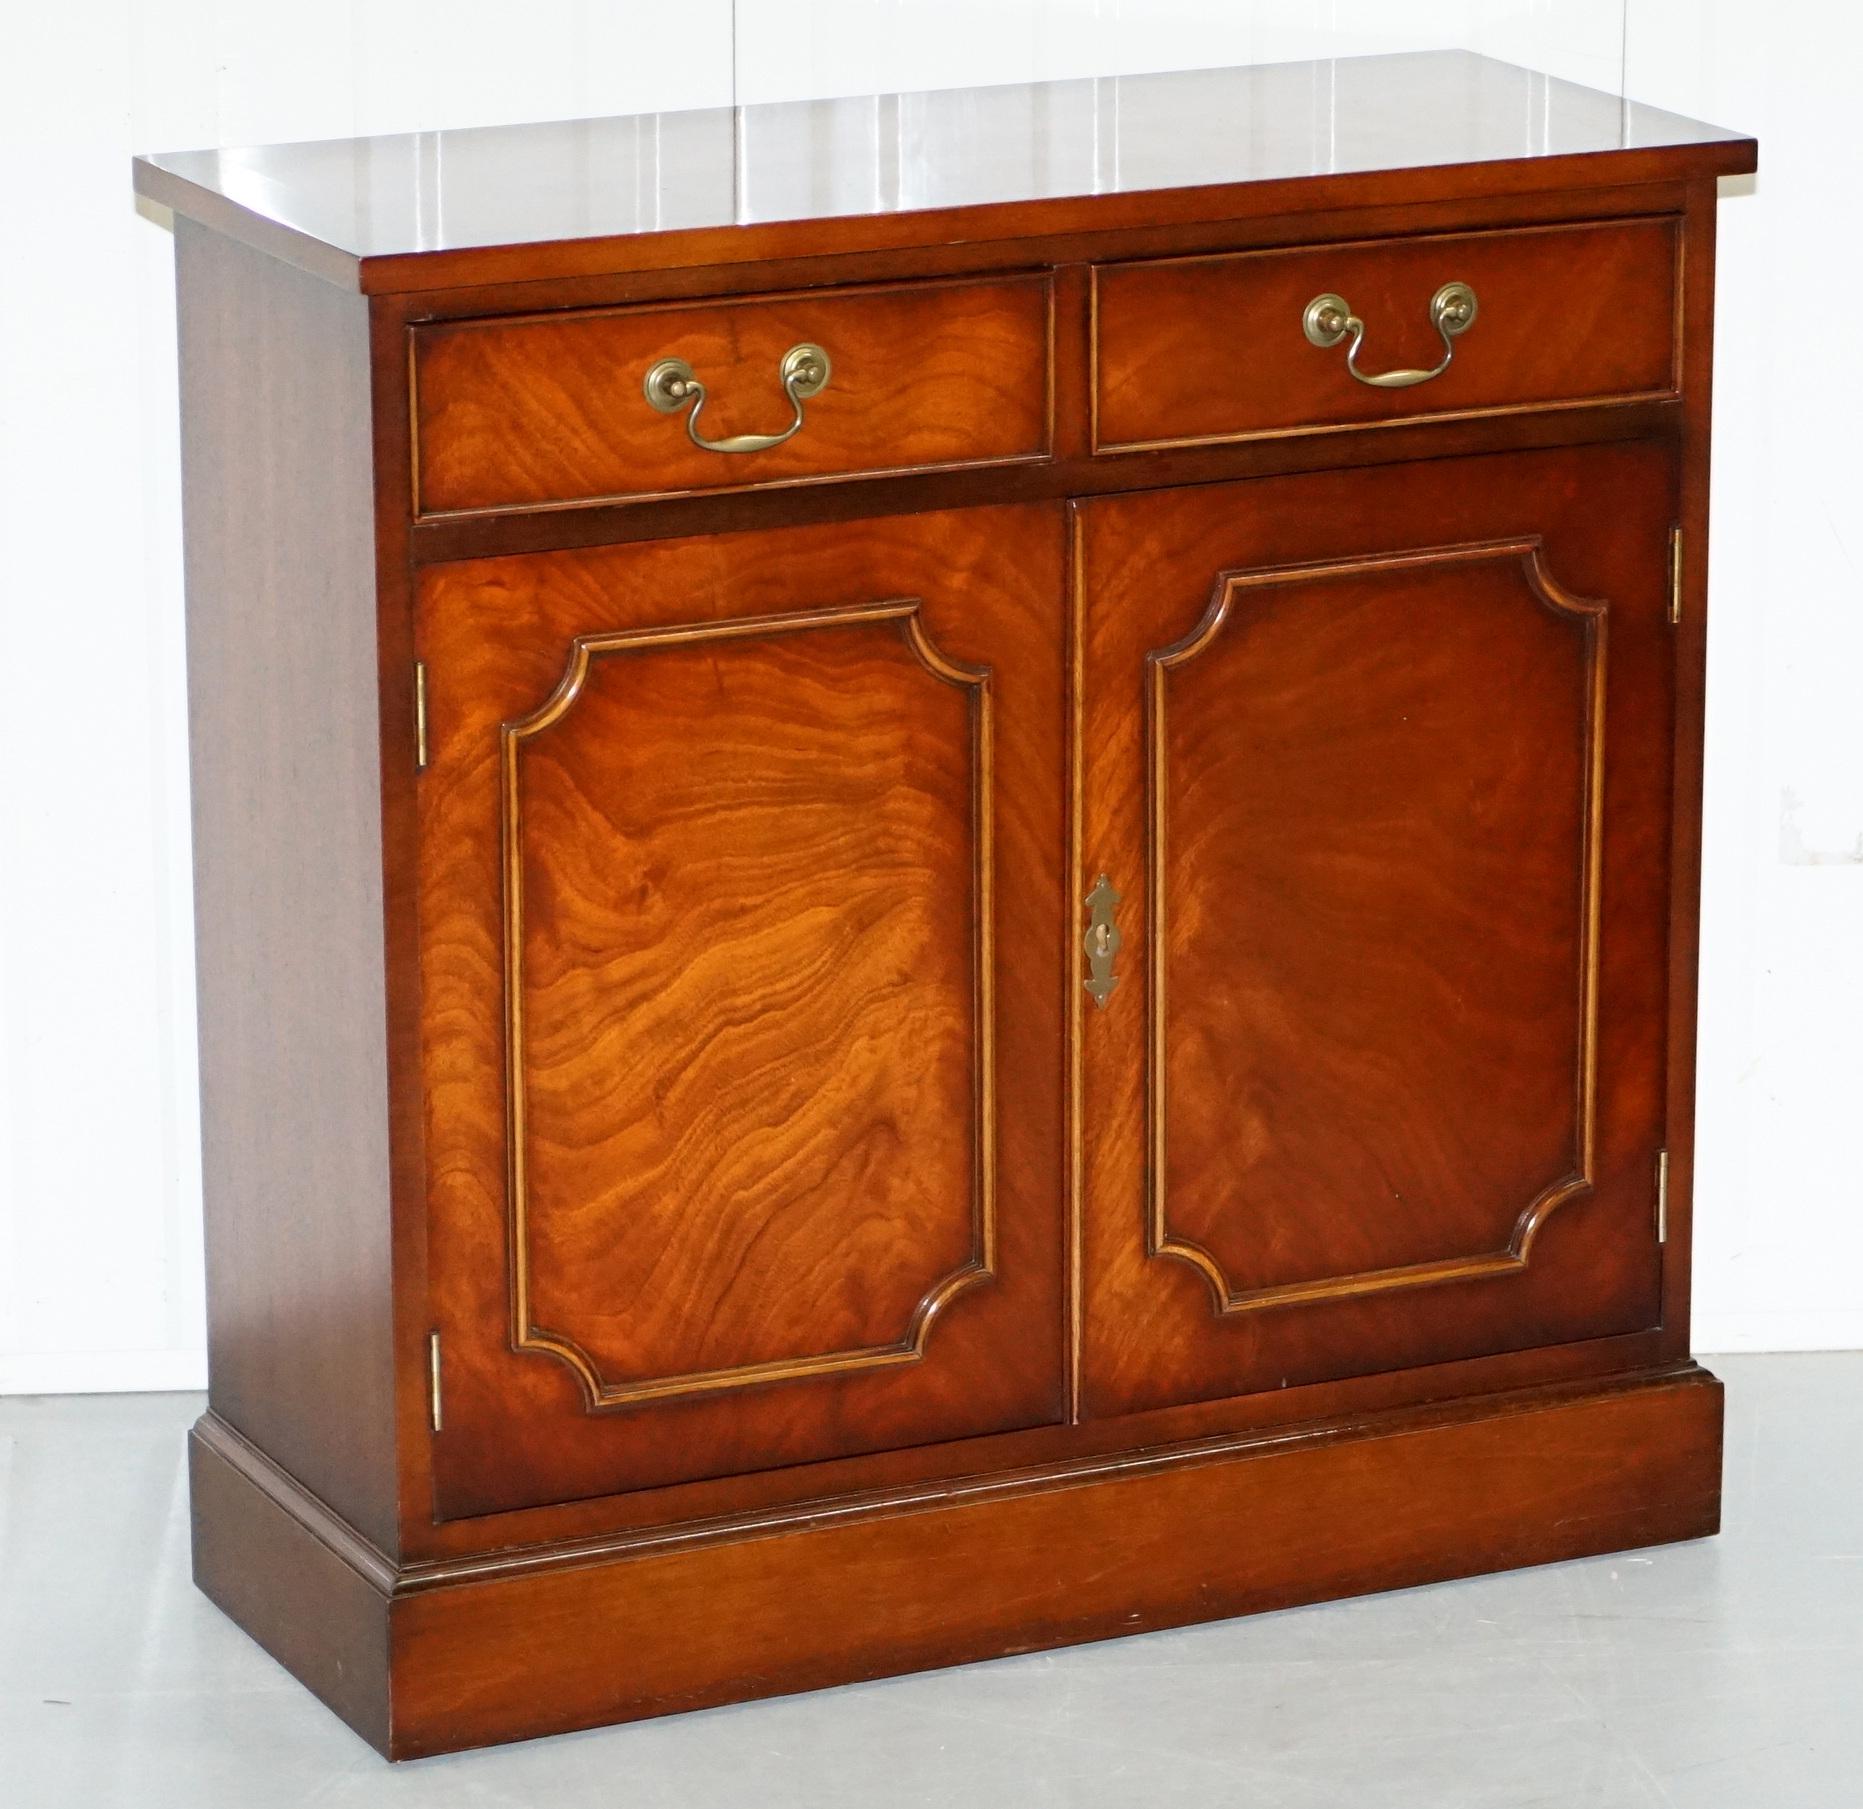 We are delighted to offer for sale this lovely pair Yew wood Bradley Classic furniture handmade in England small cabinets/bookcases with drawers

Both are in nice used condition throughout, we have cleaned waxed and polished them, the cupboard is